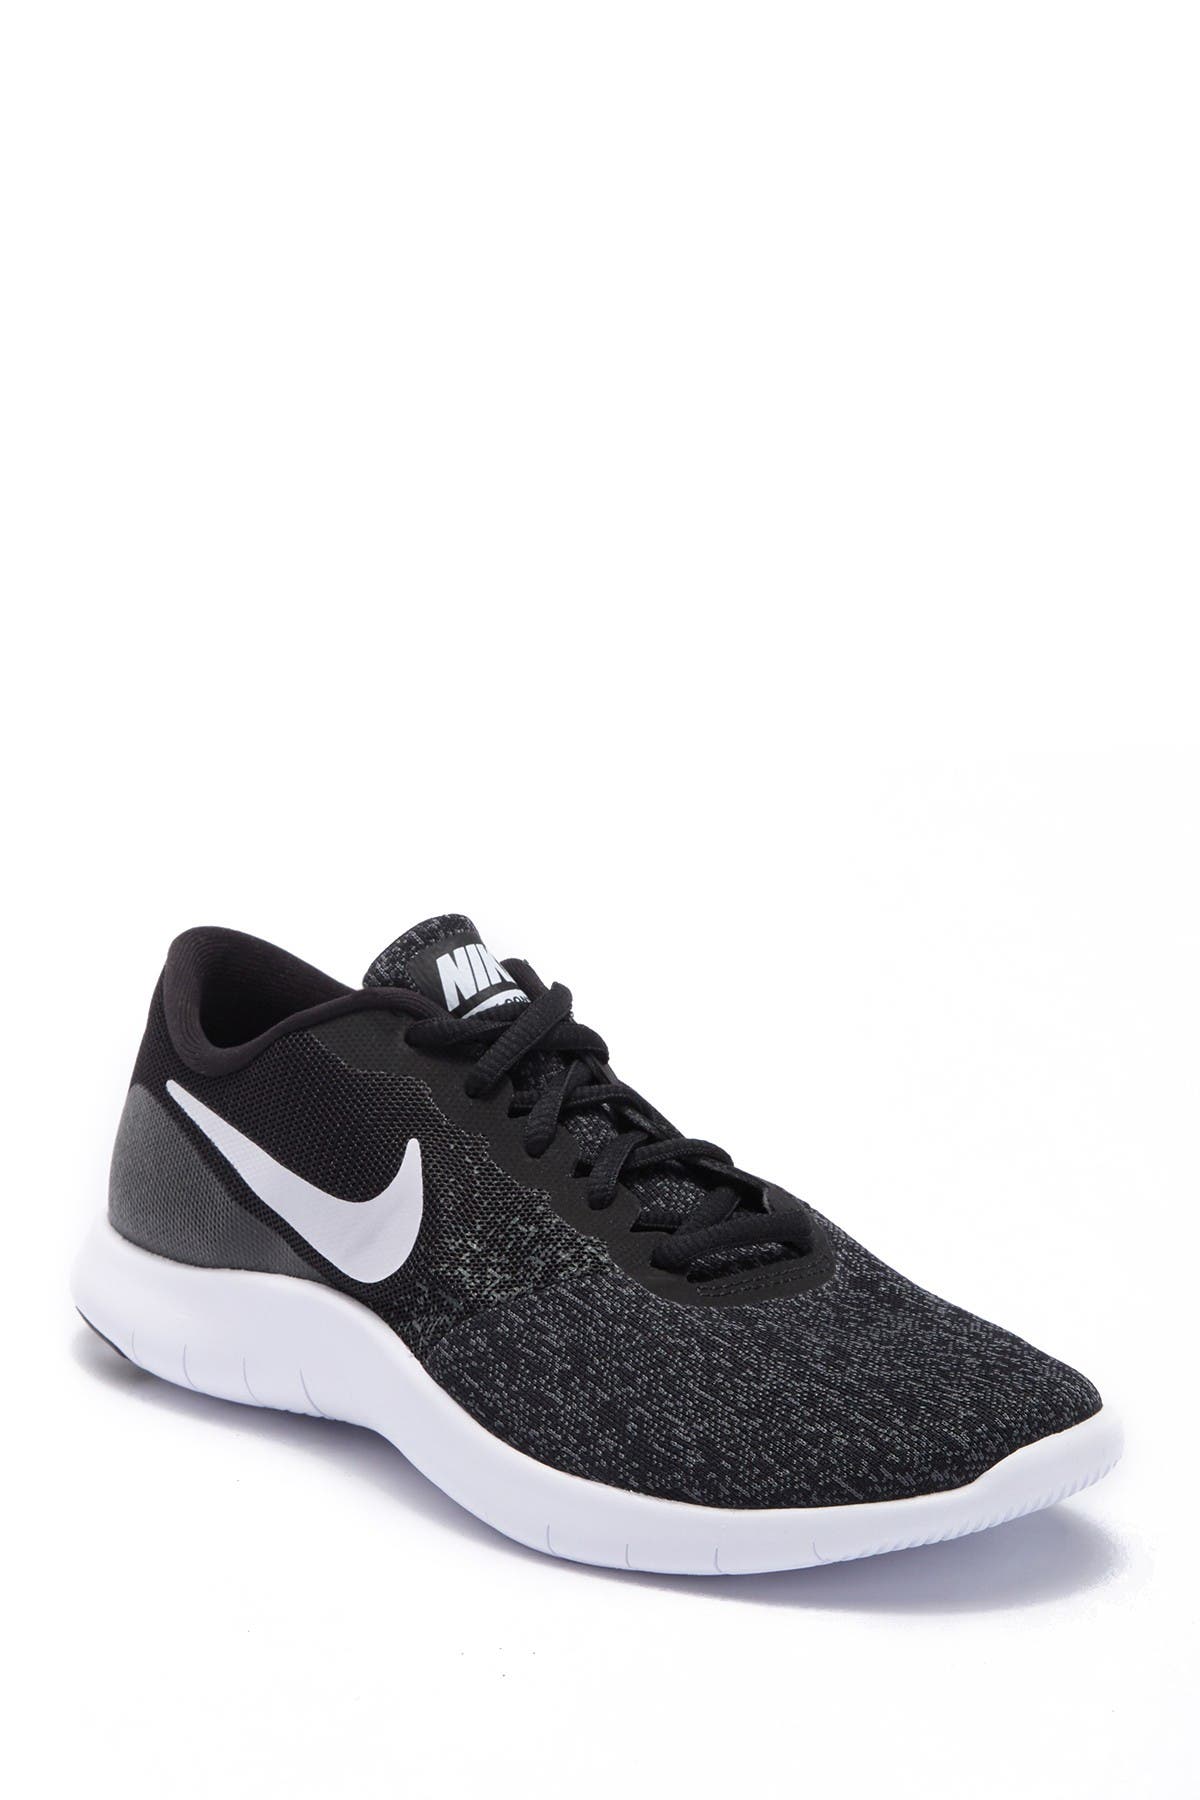 nike flex contact trainers